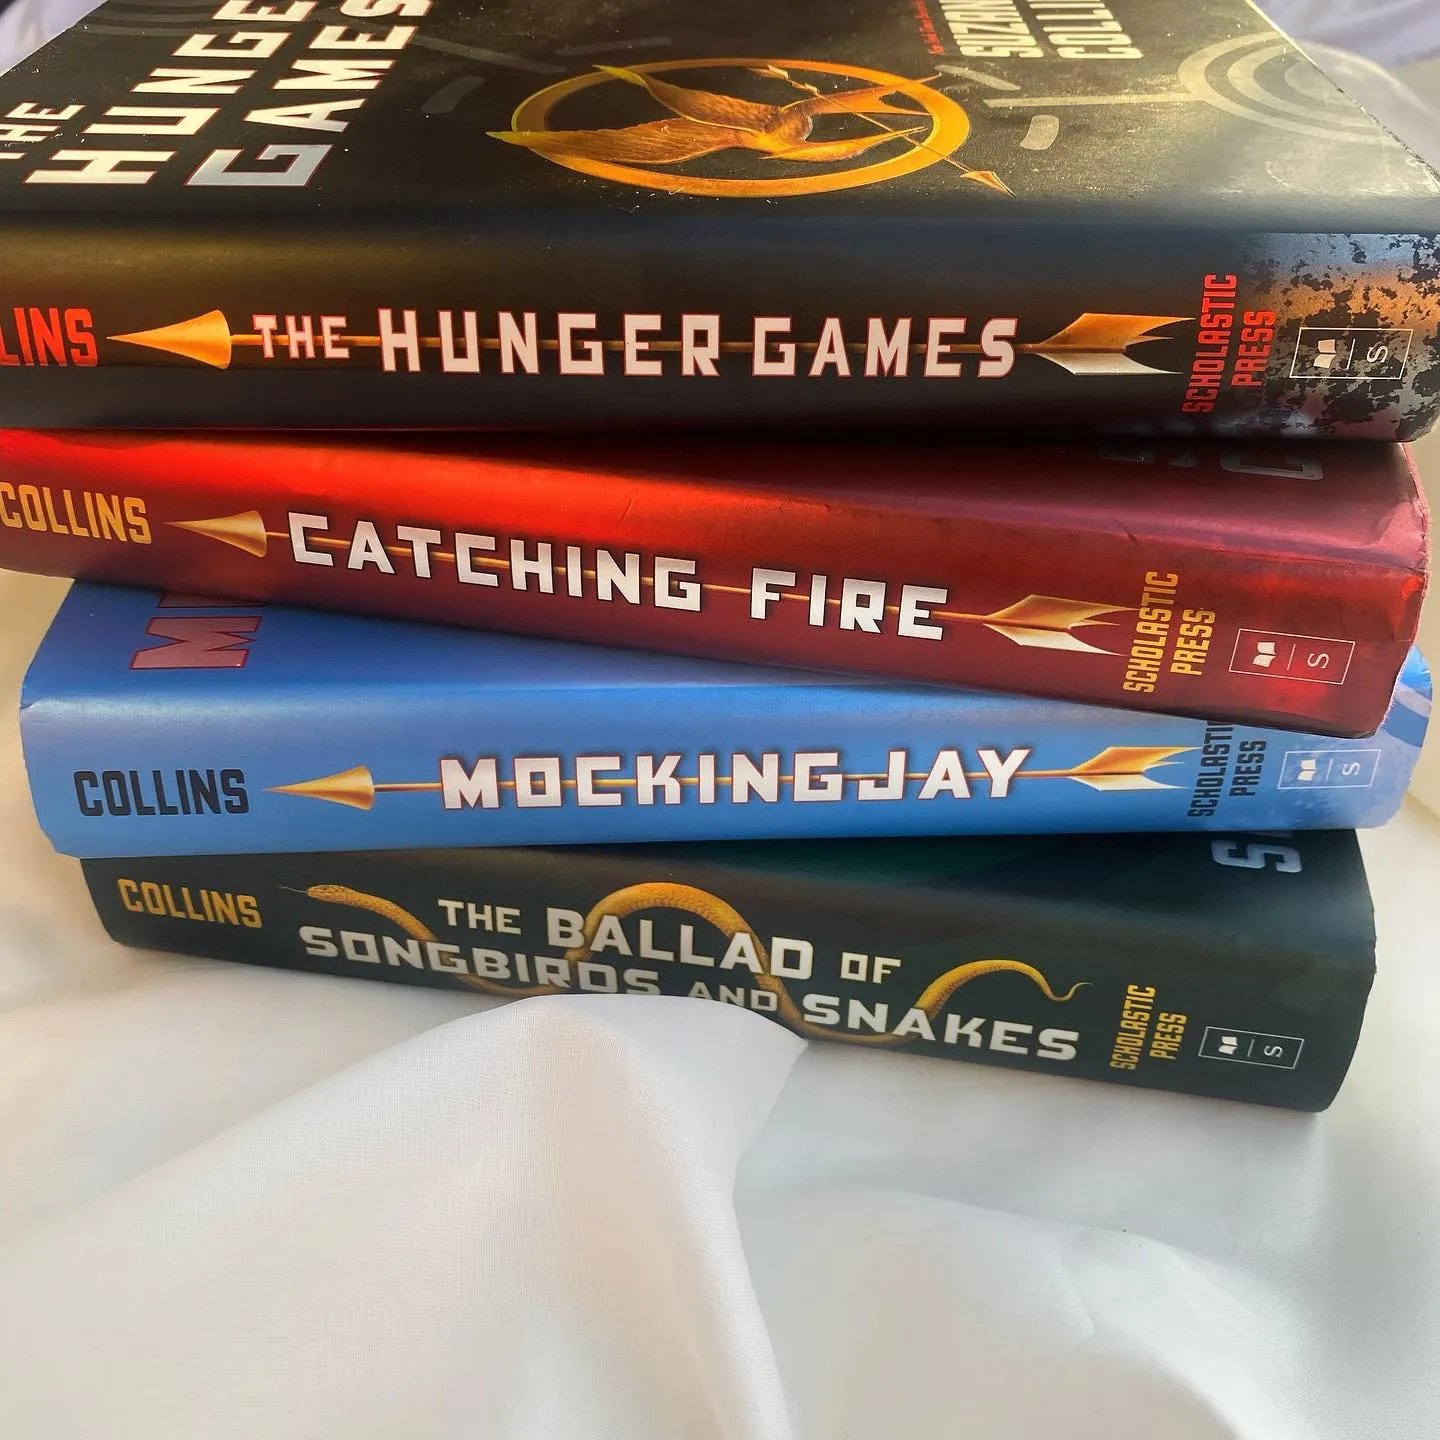 All four “The Hunger Games” books stacked up